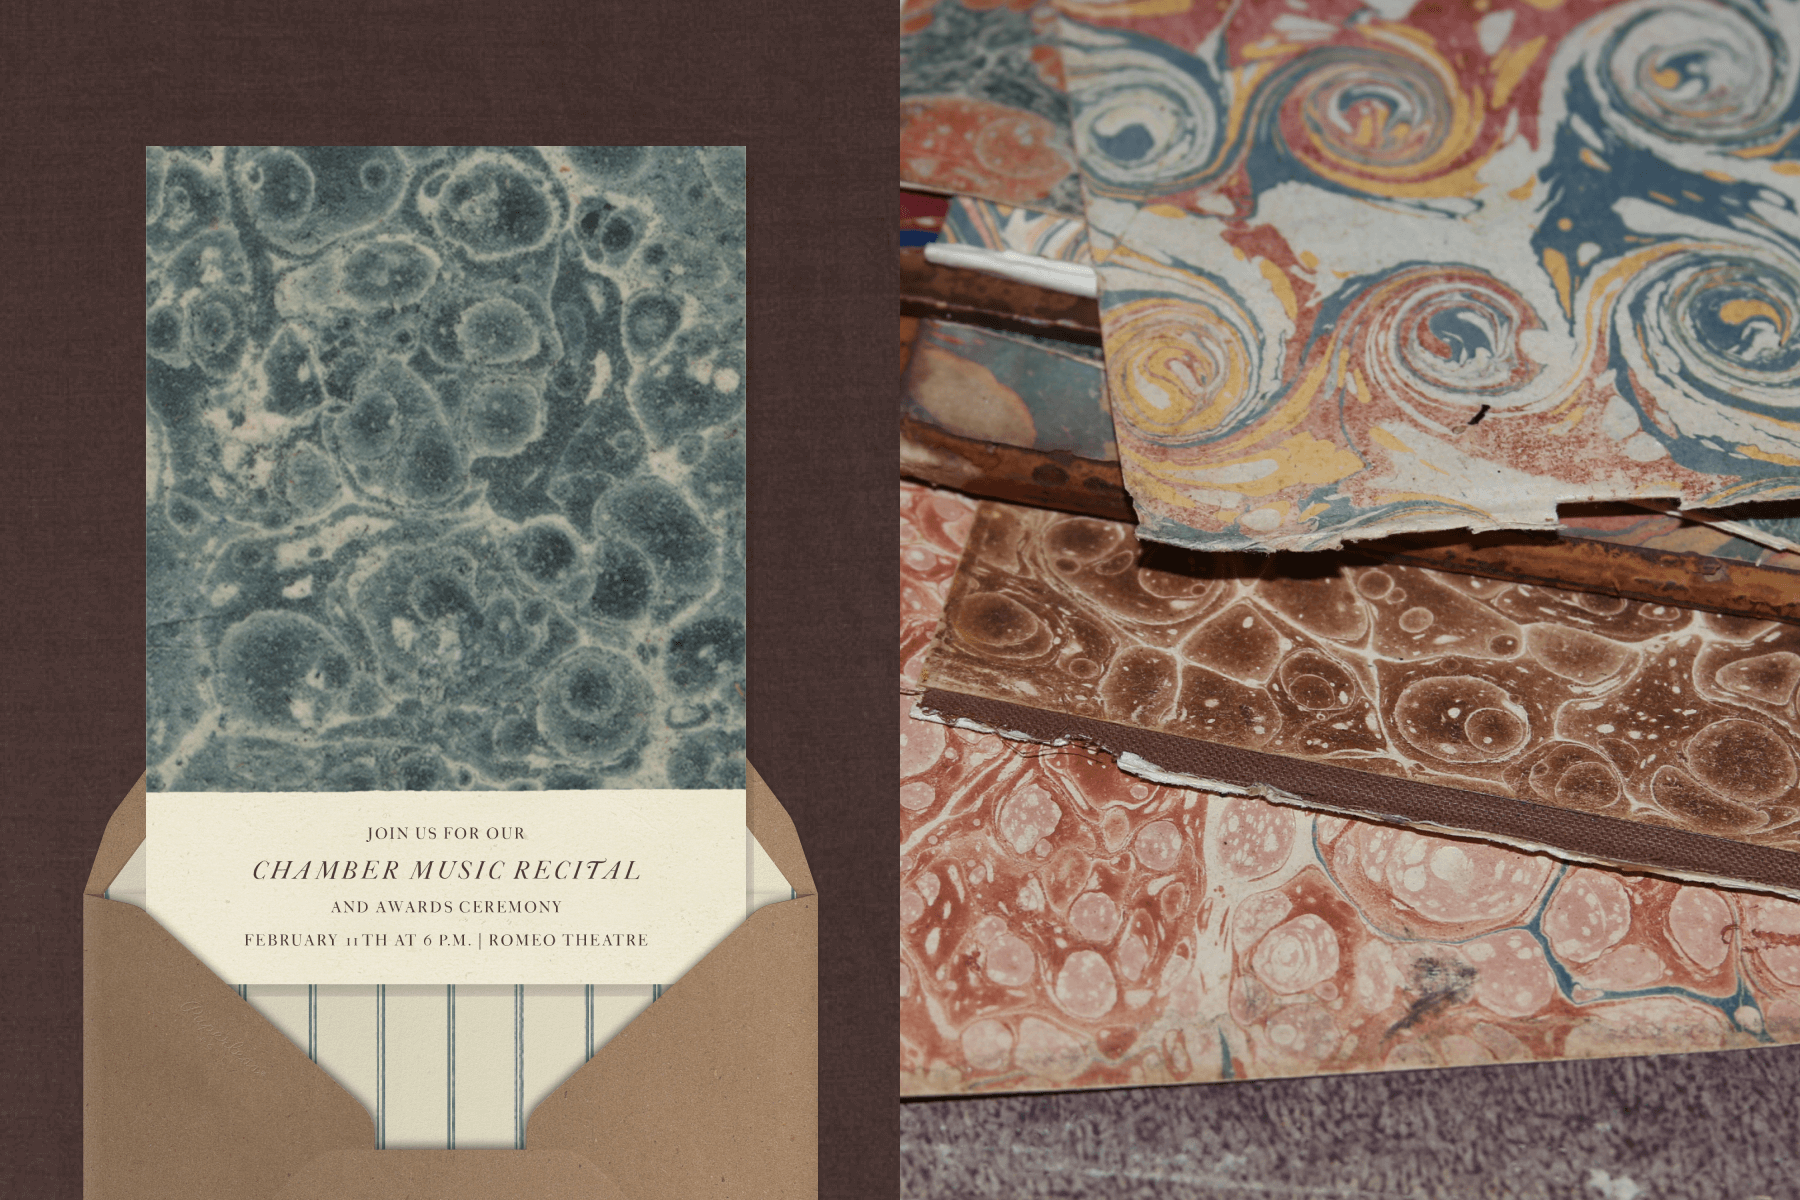 Left: A blue and white marbled music recital invitation paired with a brown paper envelope with white and blue striped lining. Right: A stack of marbled papers pulled from bookends inside John Derian's studio. 